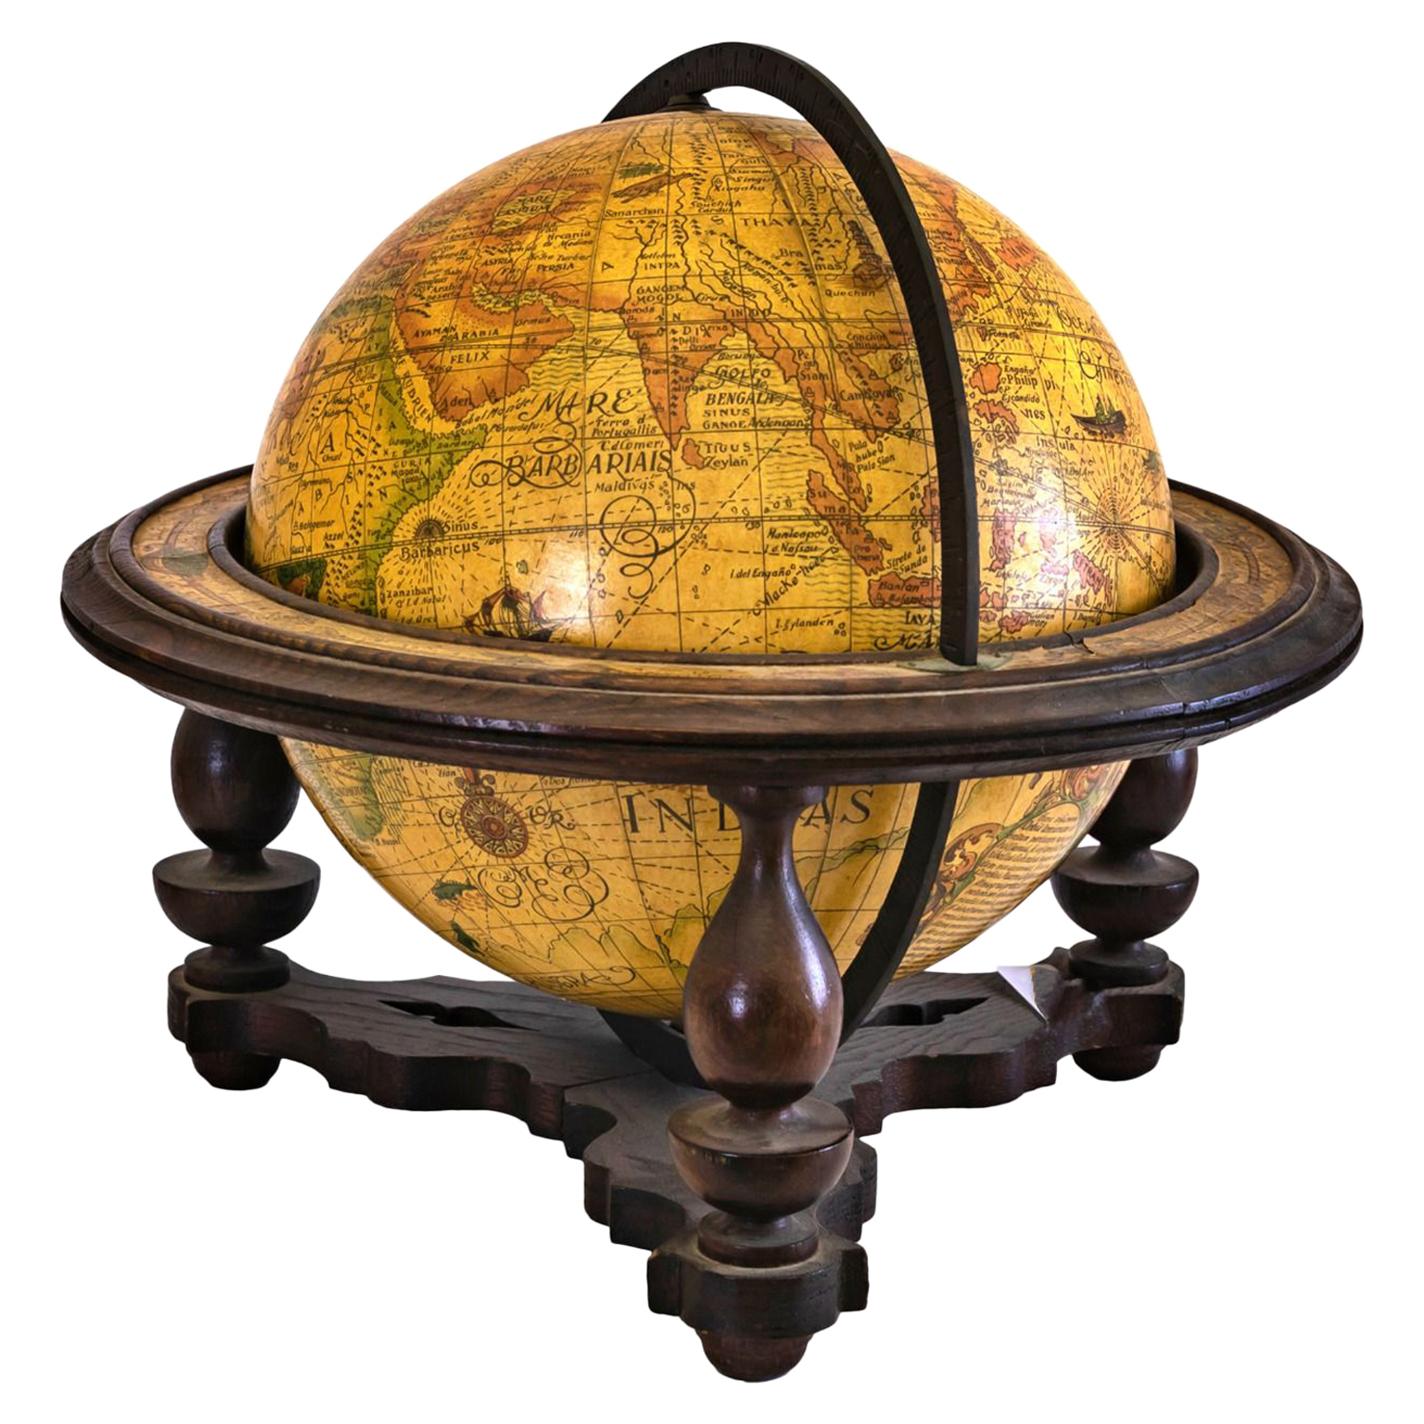 Spanish Tabletop Globe with Turned Wood Support, Early 20th Century